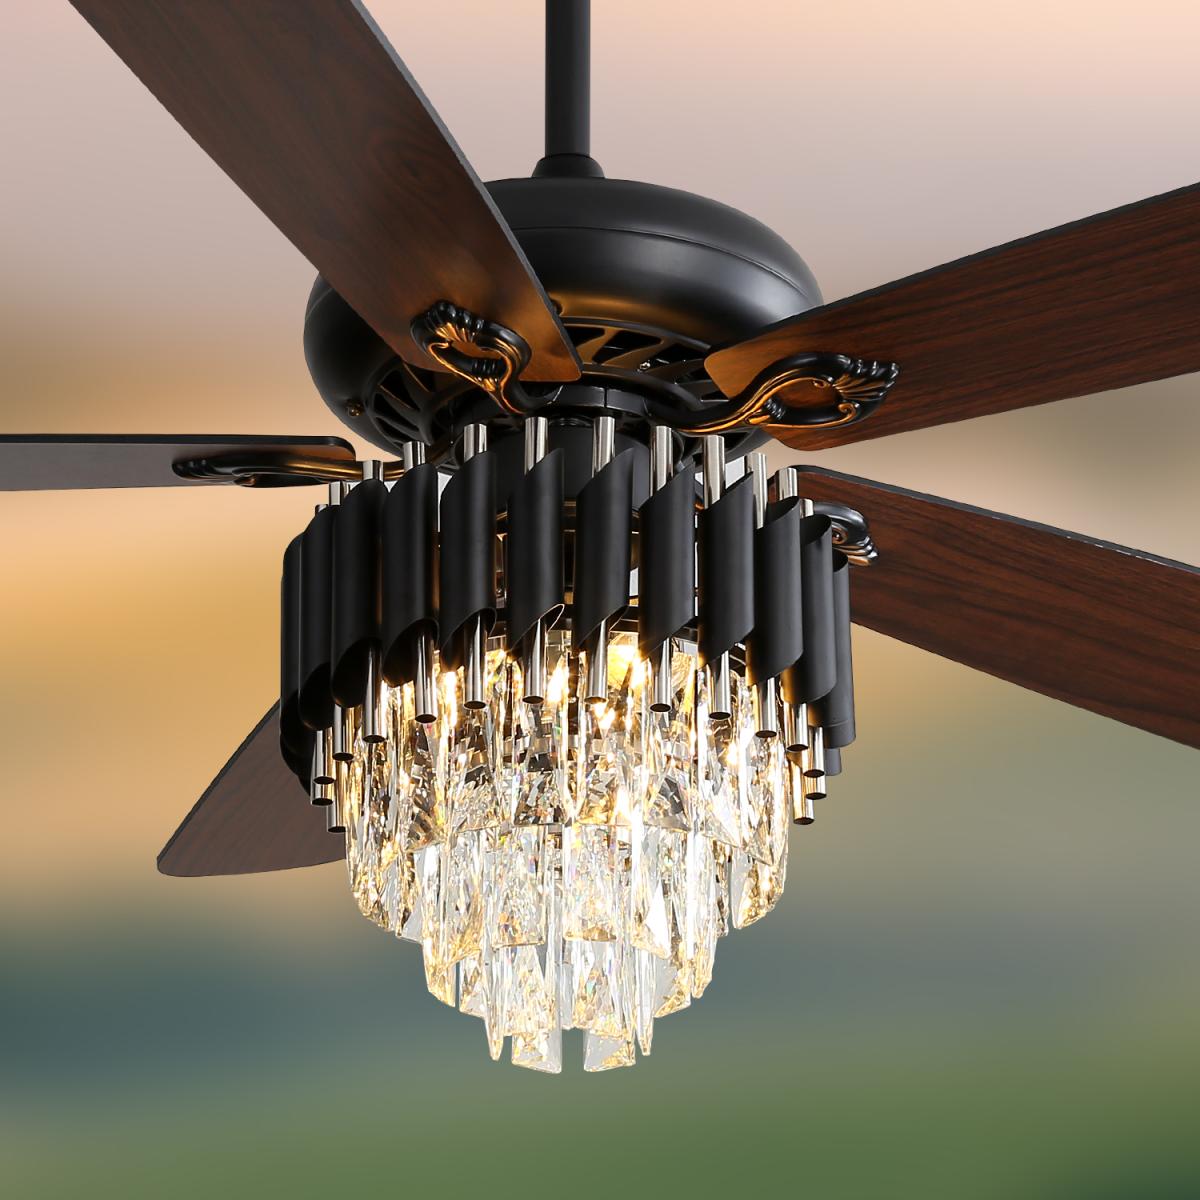 52 Inch Classics Ceiling Fan With 3 Speed Wind 5 Plywood Blades Remote Control Ac Motor With Light